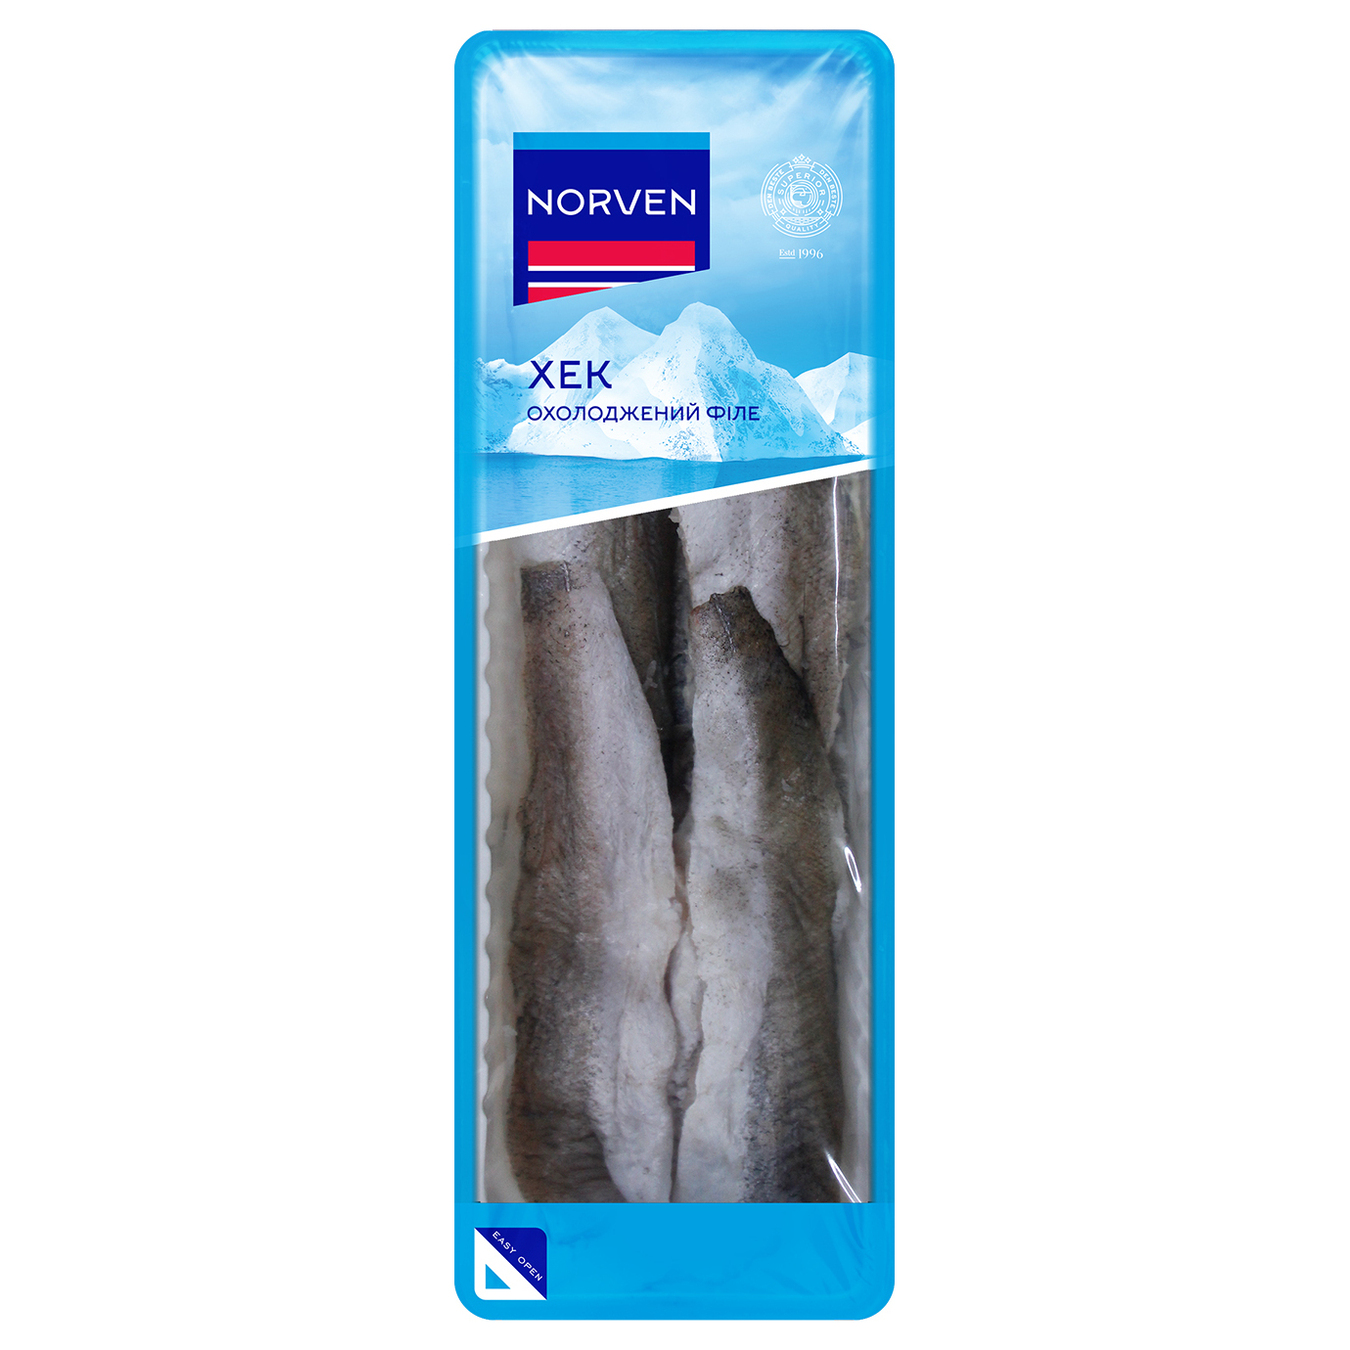 Norven Hake Fillet with Skin Chilled Vacuum Packaging 750g